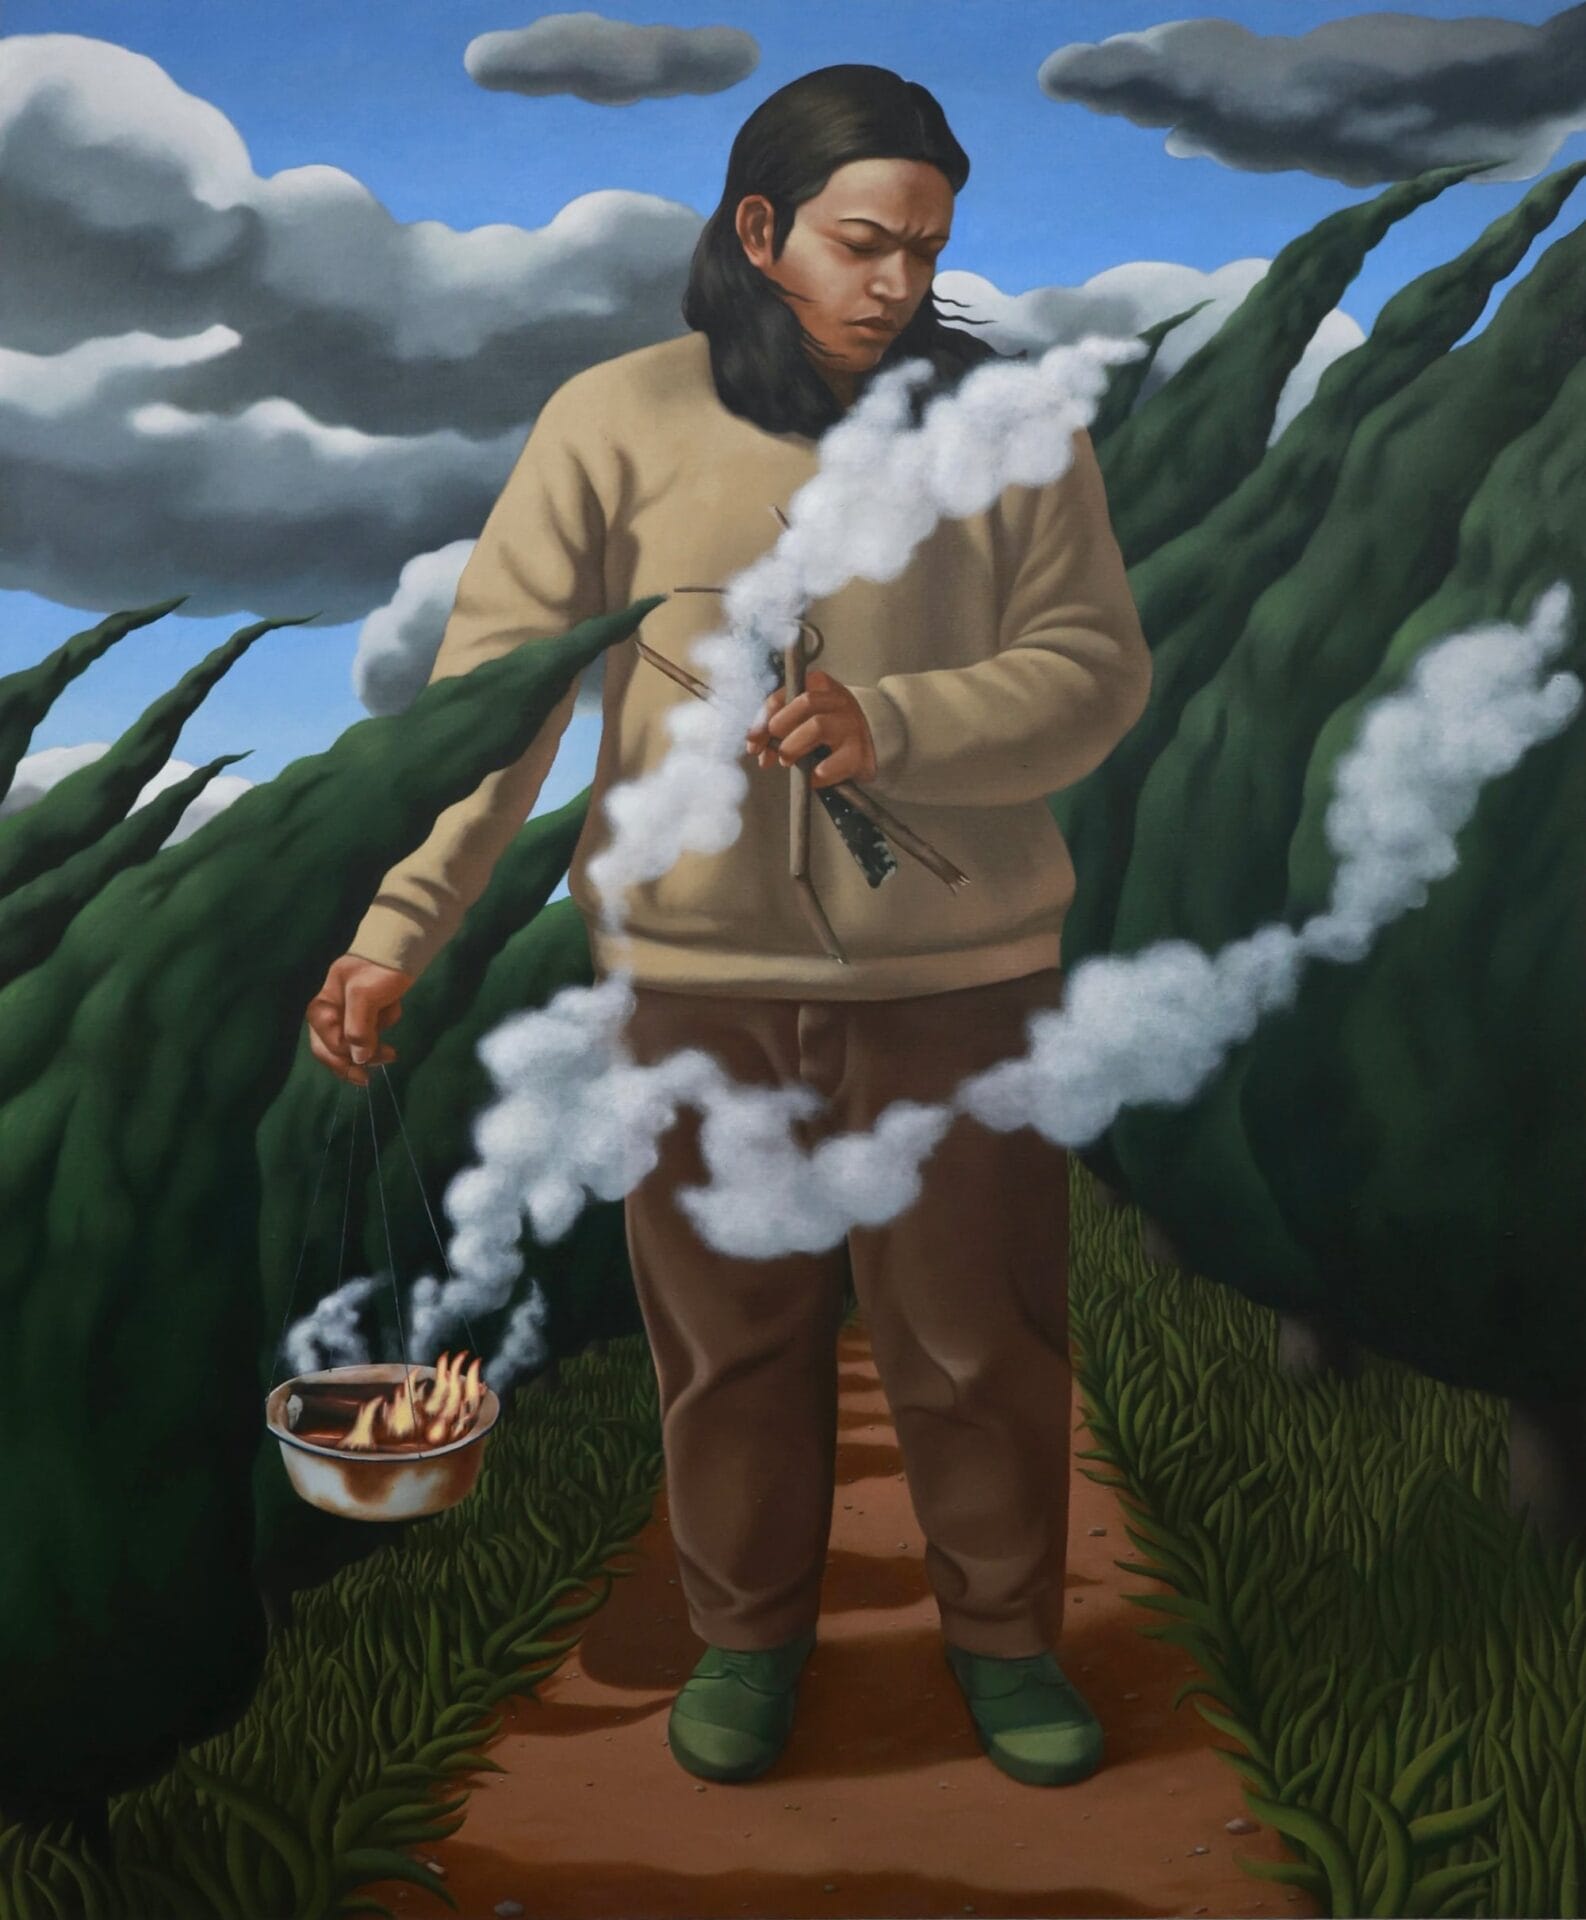 a man in a beige sweatshirt with brown pants walks on a path holding a kettle with fire and smoke